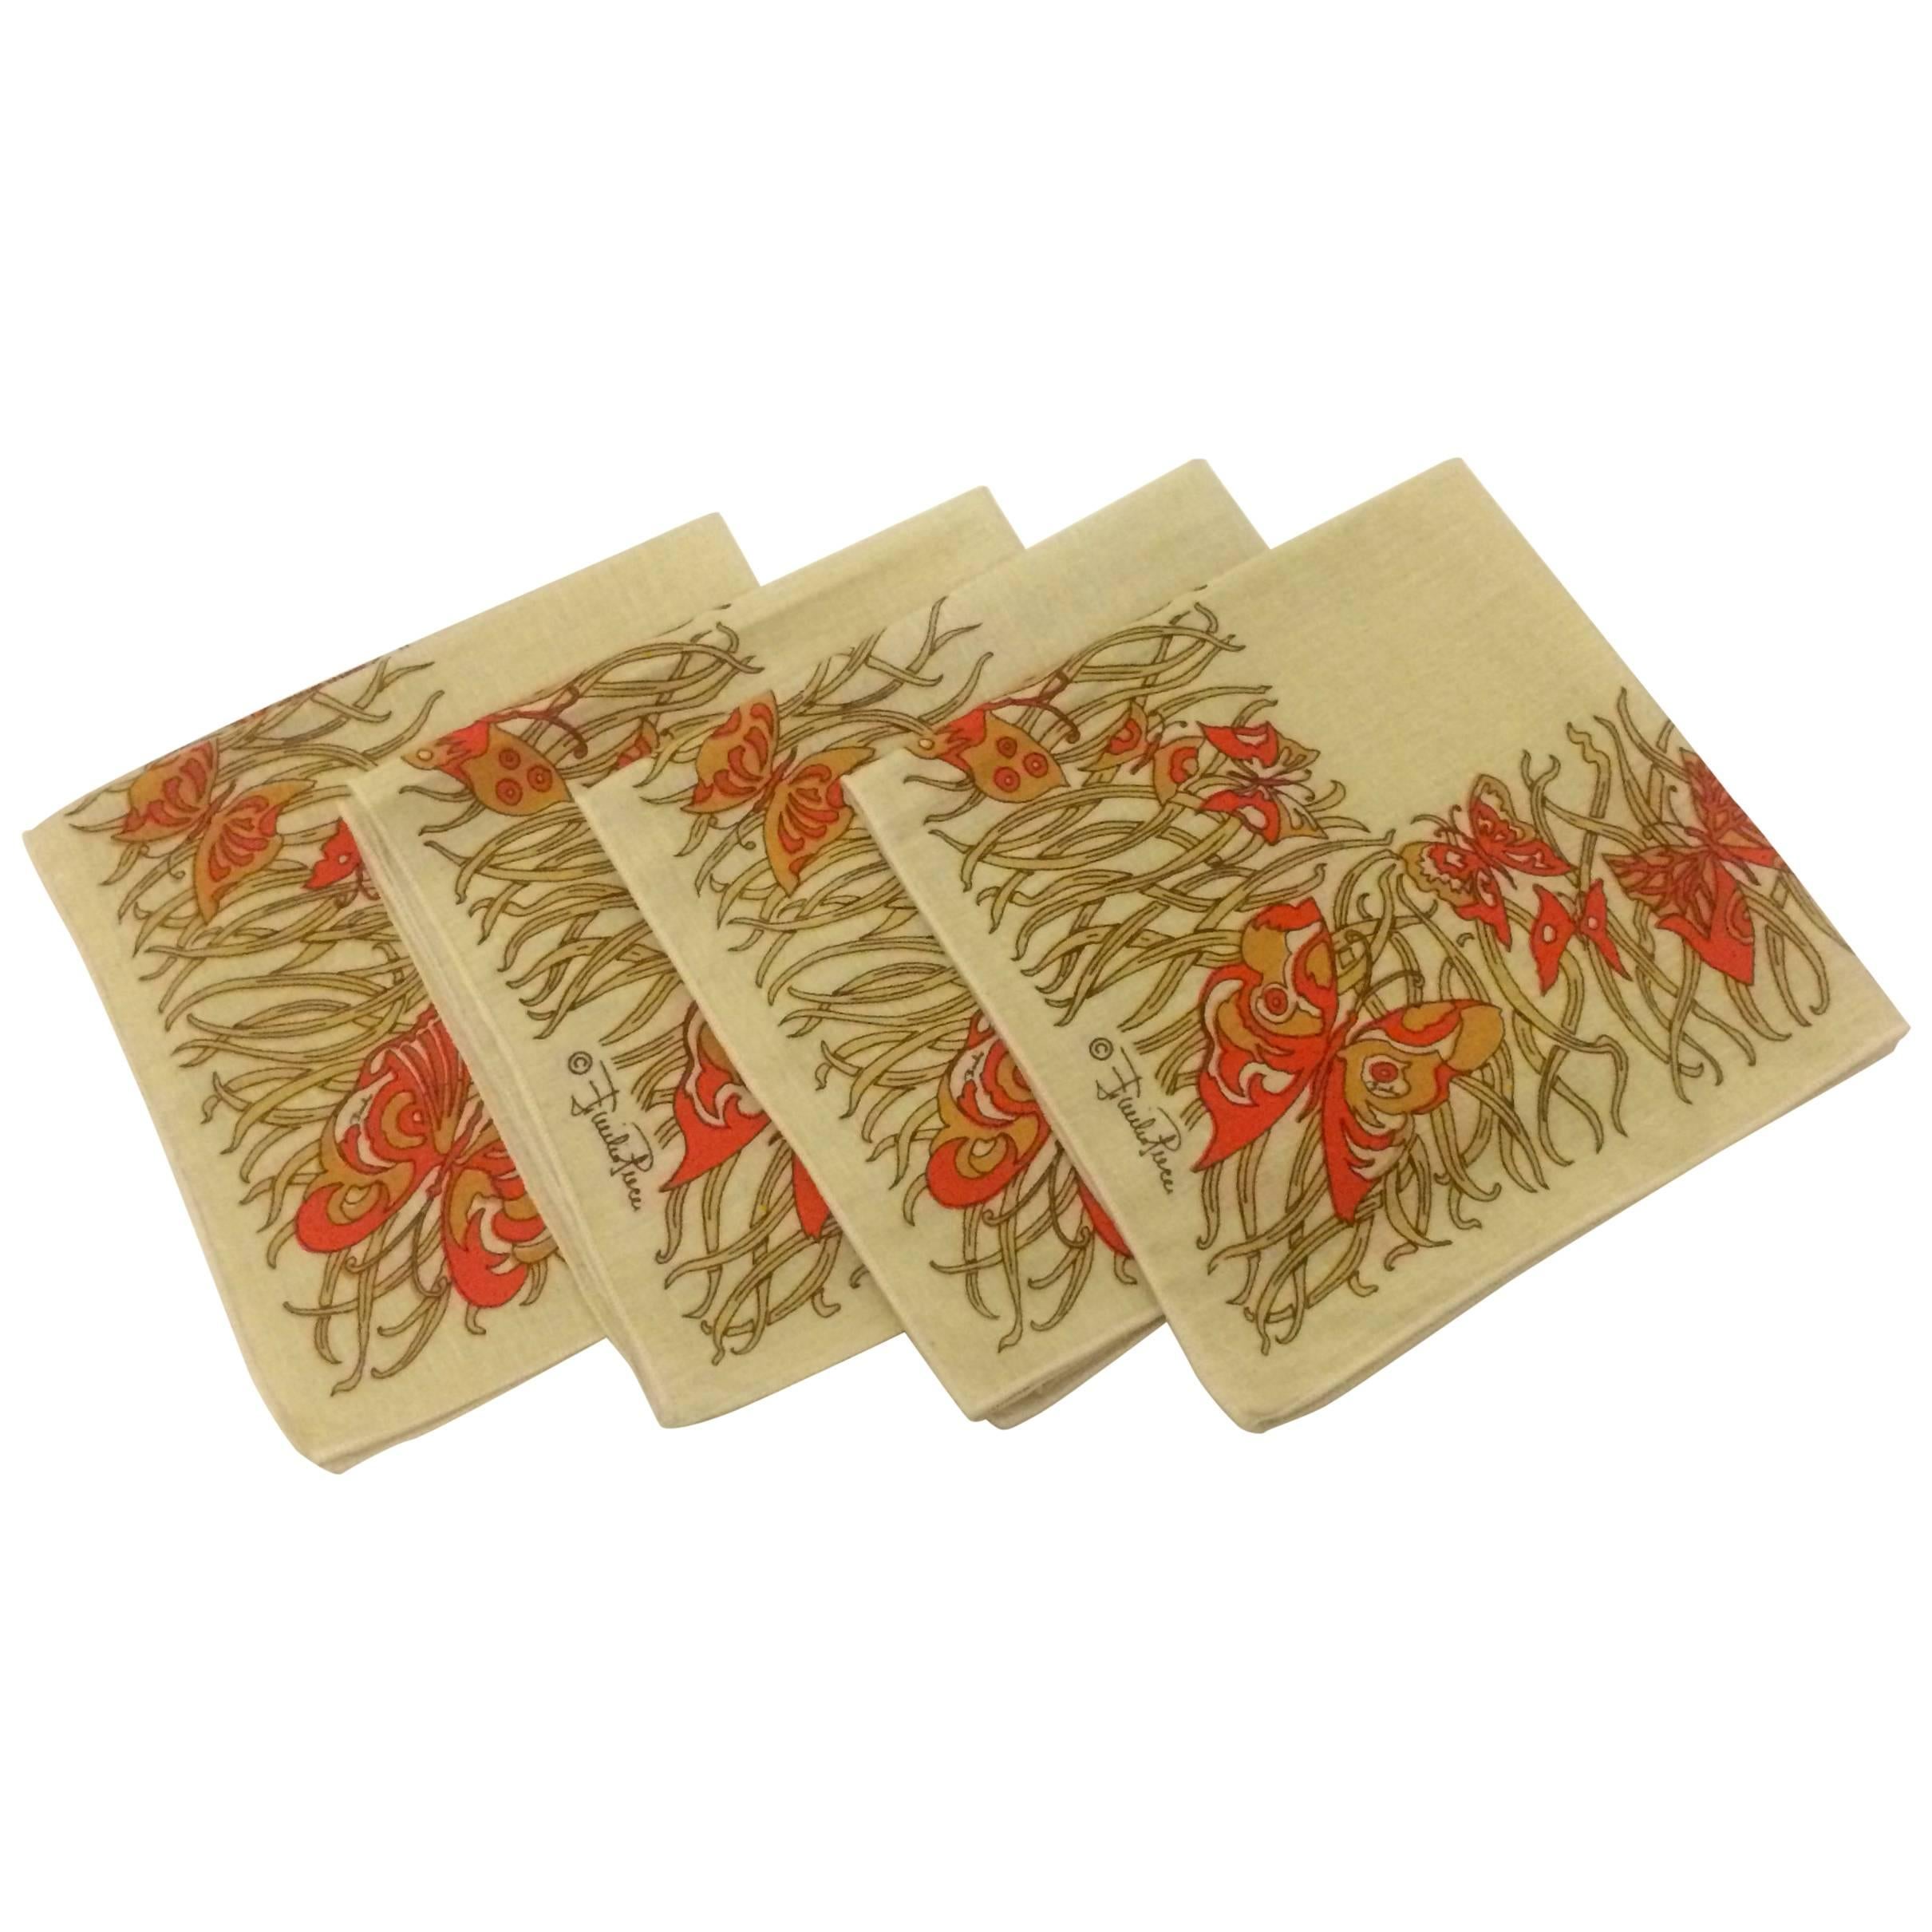 Emilio Pucci 1970s Cream and Orange Butterfly Print Cloth Napkins Set of Four